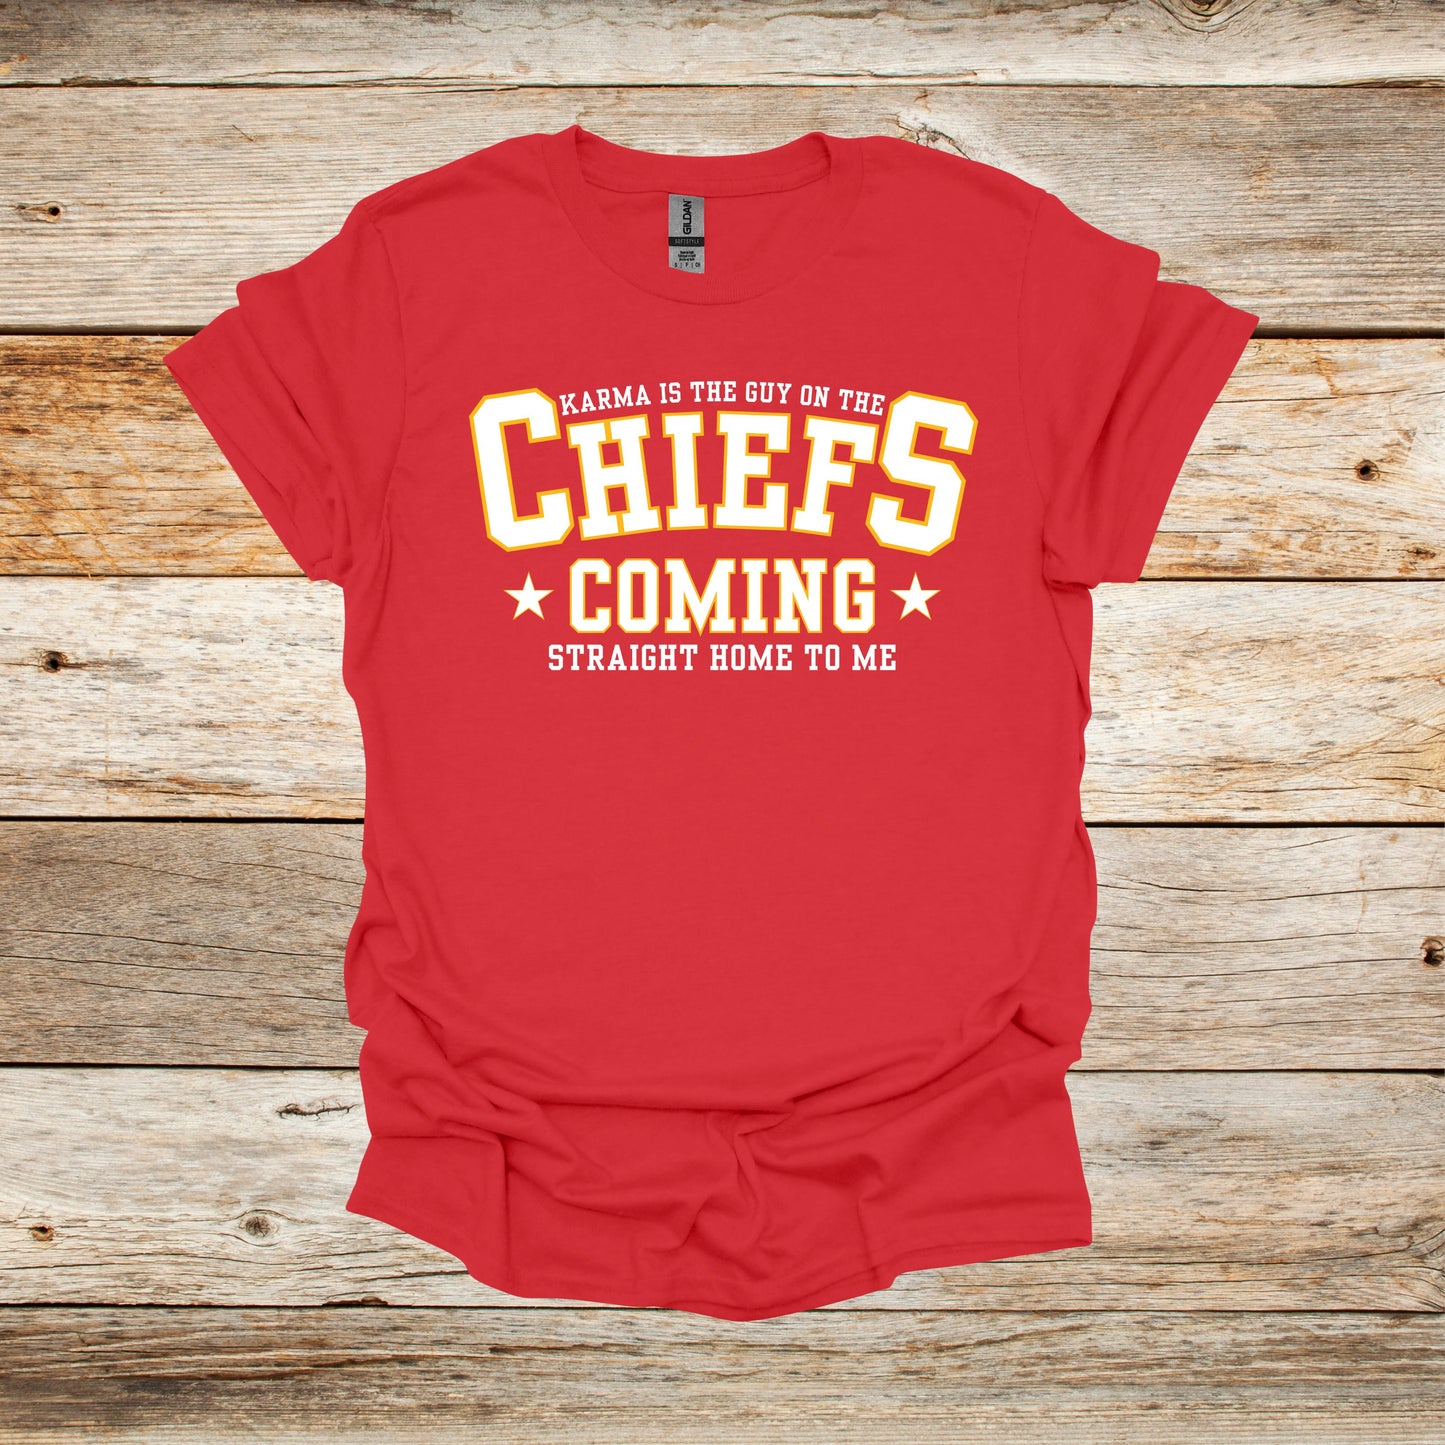 Football T-Shirt - Karma is the Guy - Chiefs Football - Adult and Children's Tee Shirts - Sports T-Shirts Graphic Avenue 